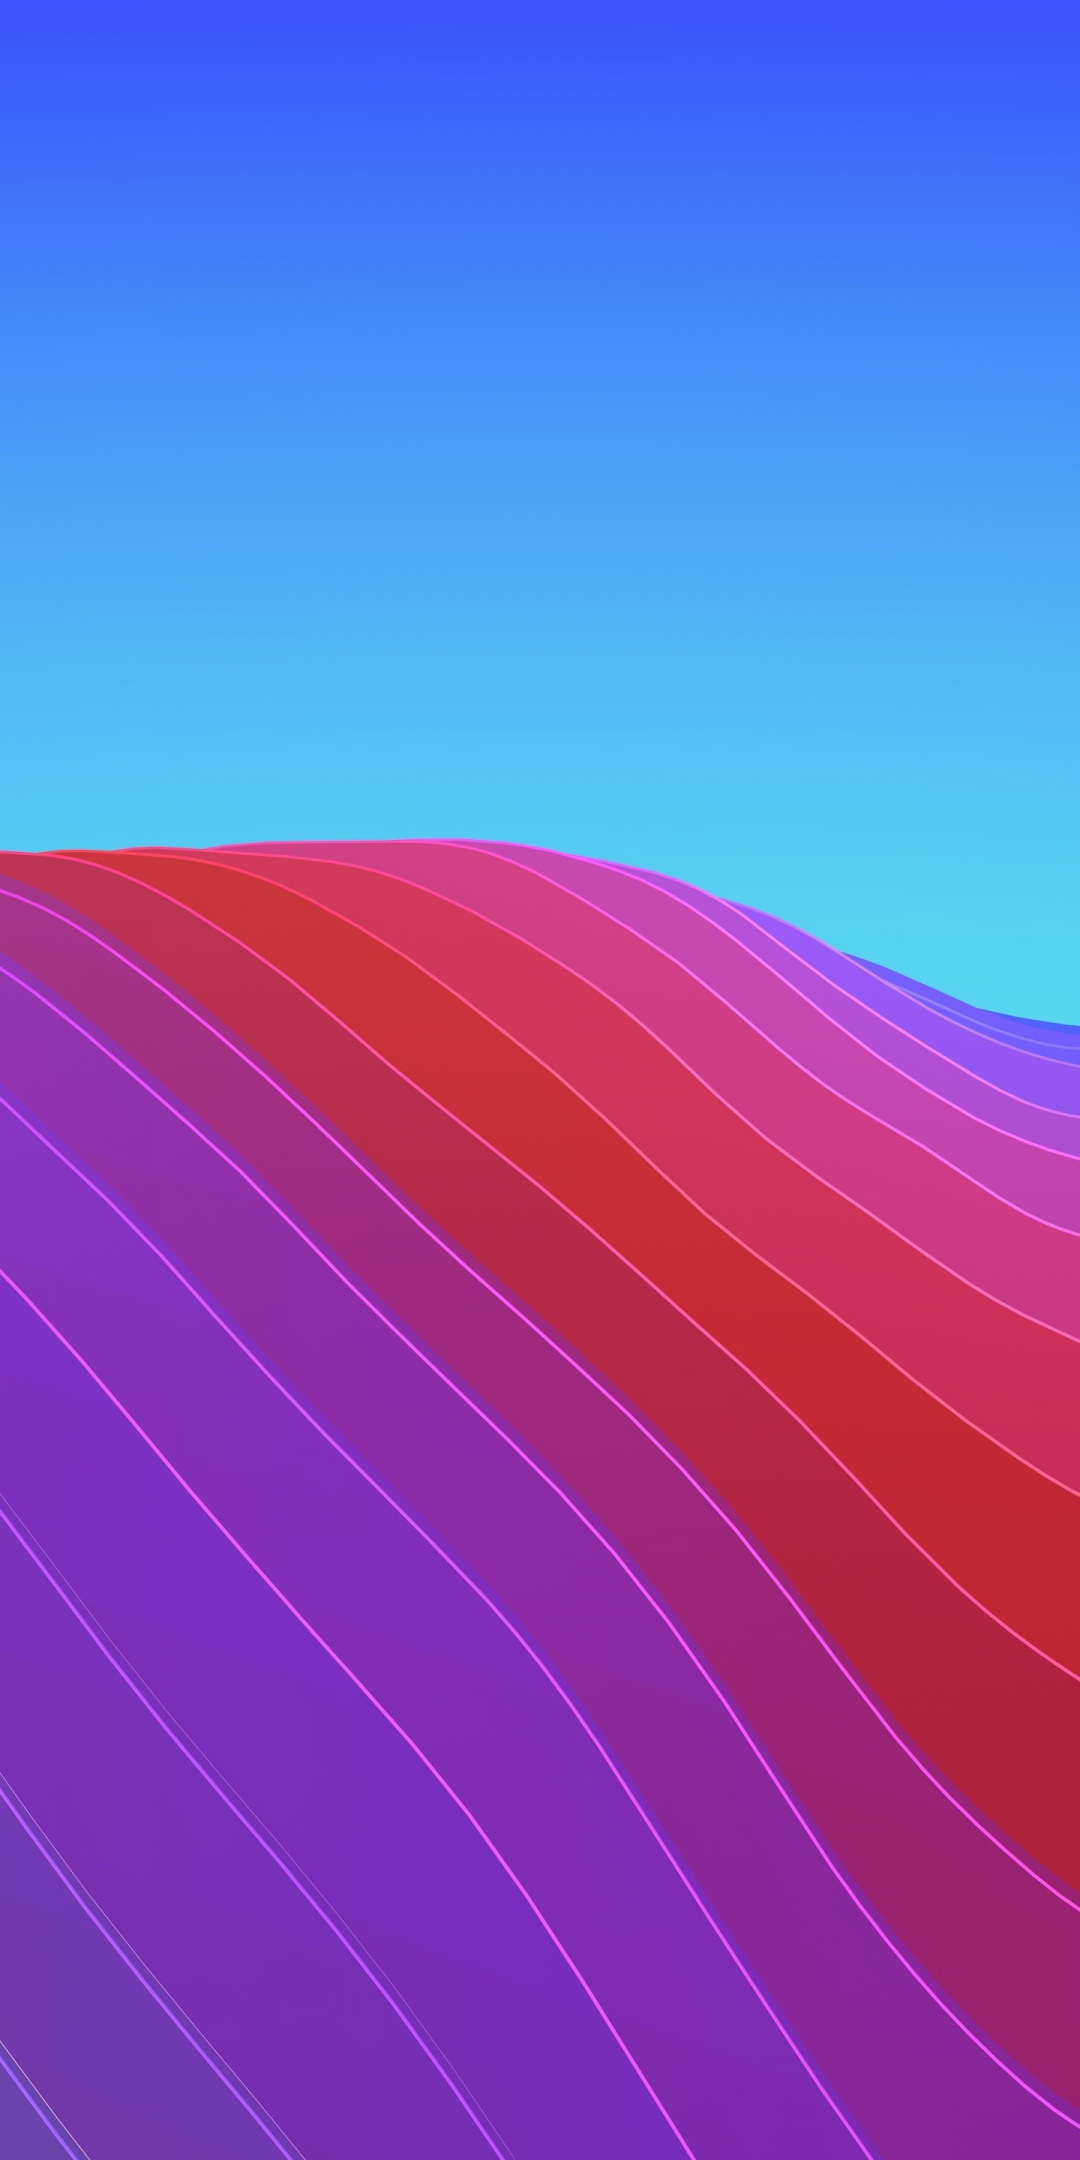 Waves, abstract, gradient, iOS 11, colorful, iPhone x, stock, 1080x2160 wallpaper